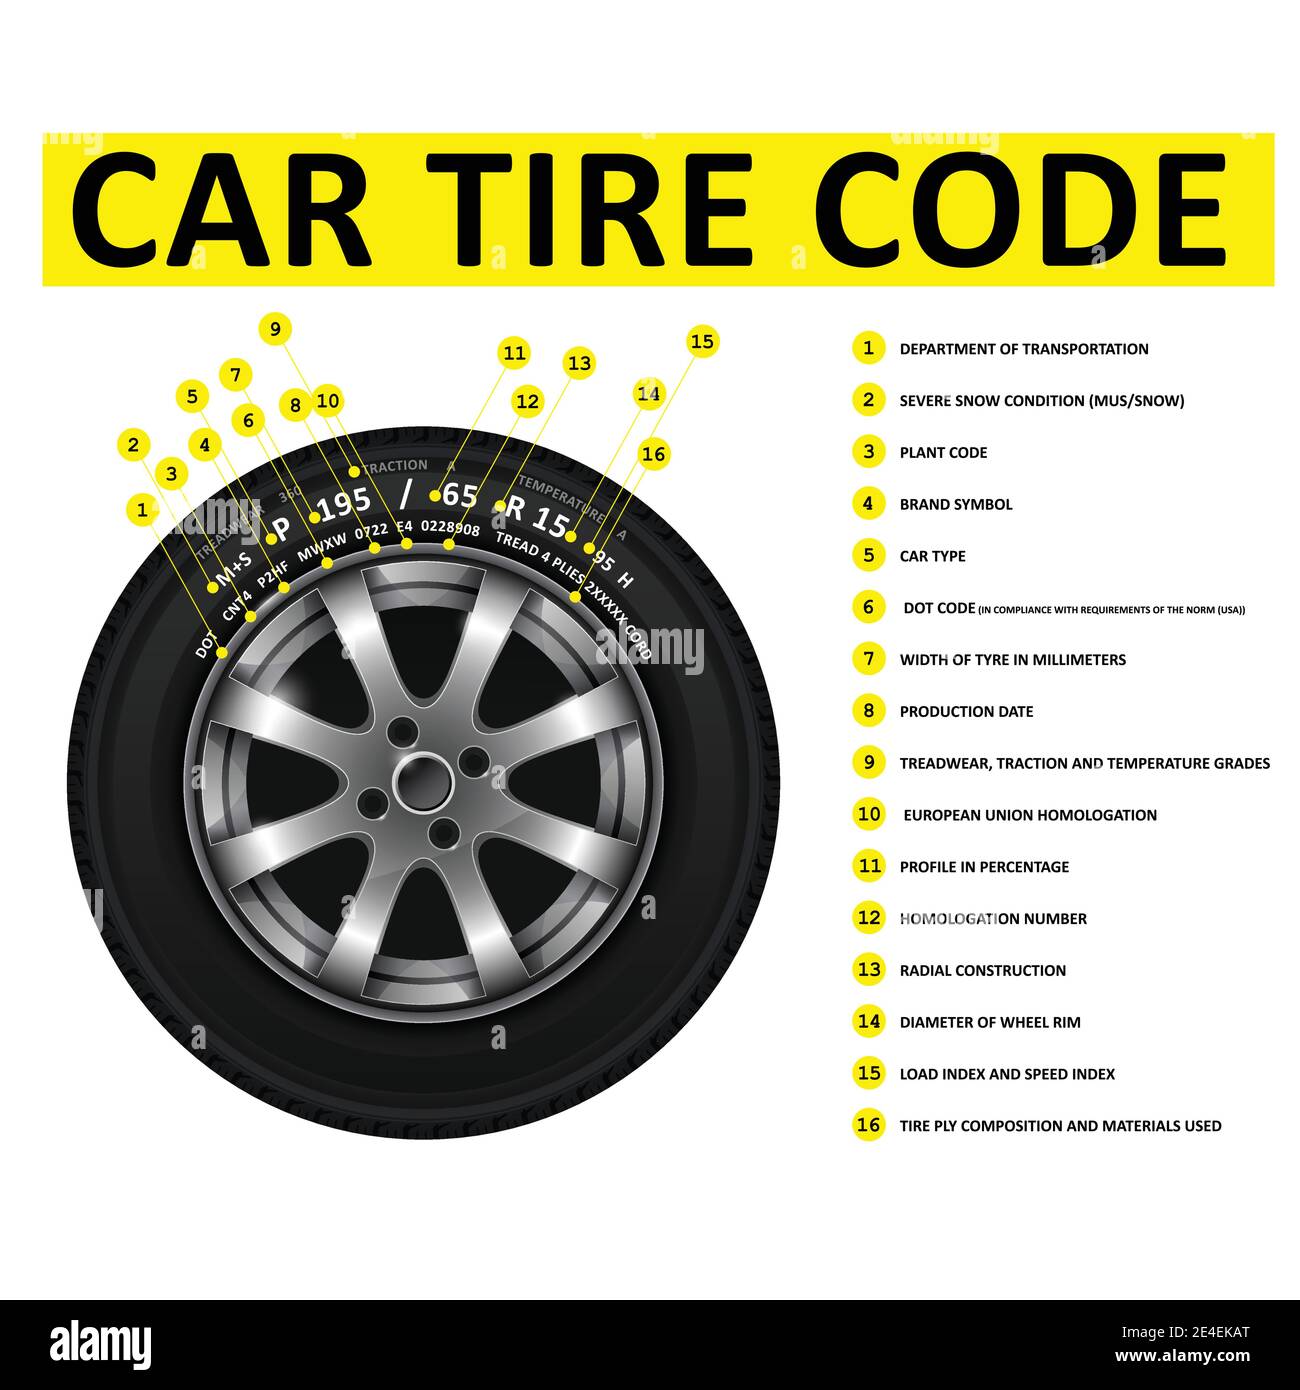 Car tire code deciphering, marking of tires, nomenclature of wheel tyres, size, wheel dimensions and construction type information, vector Stock Vector